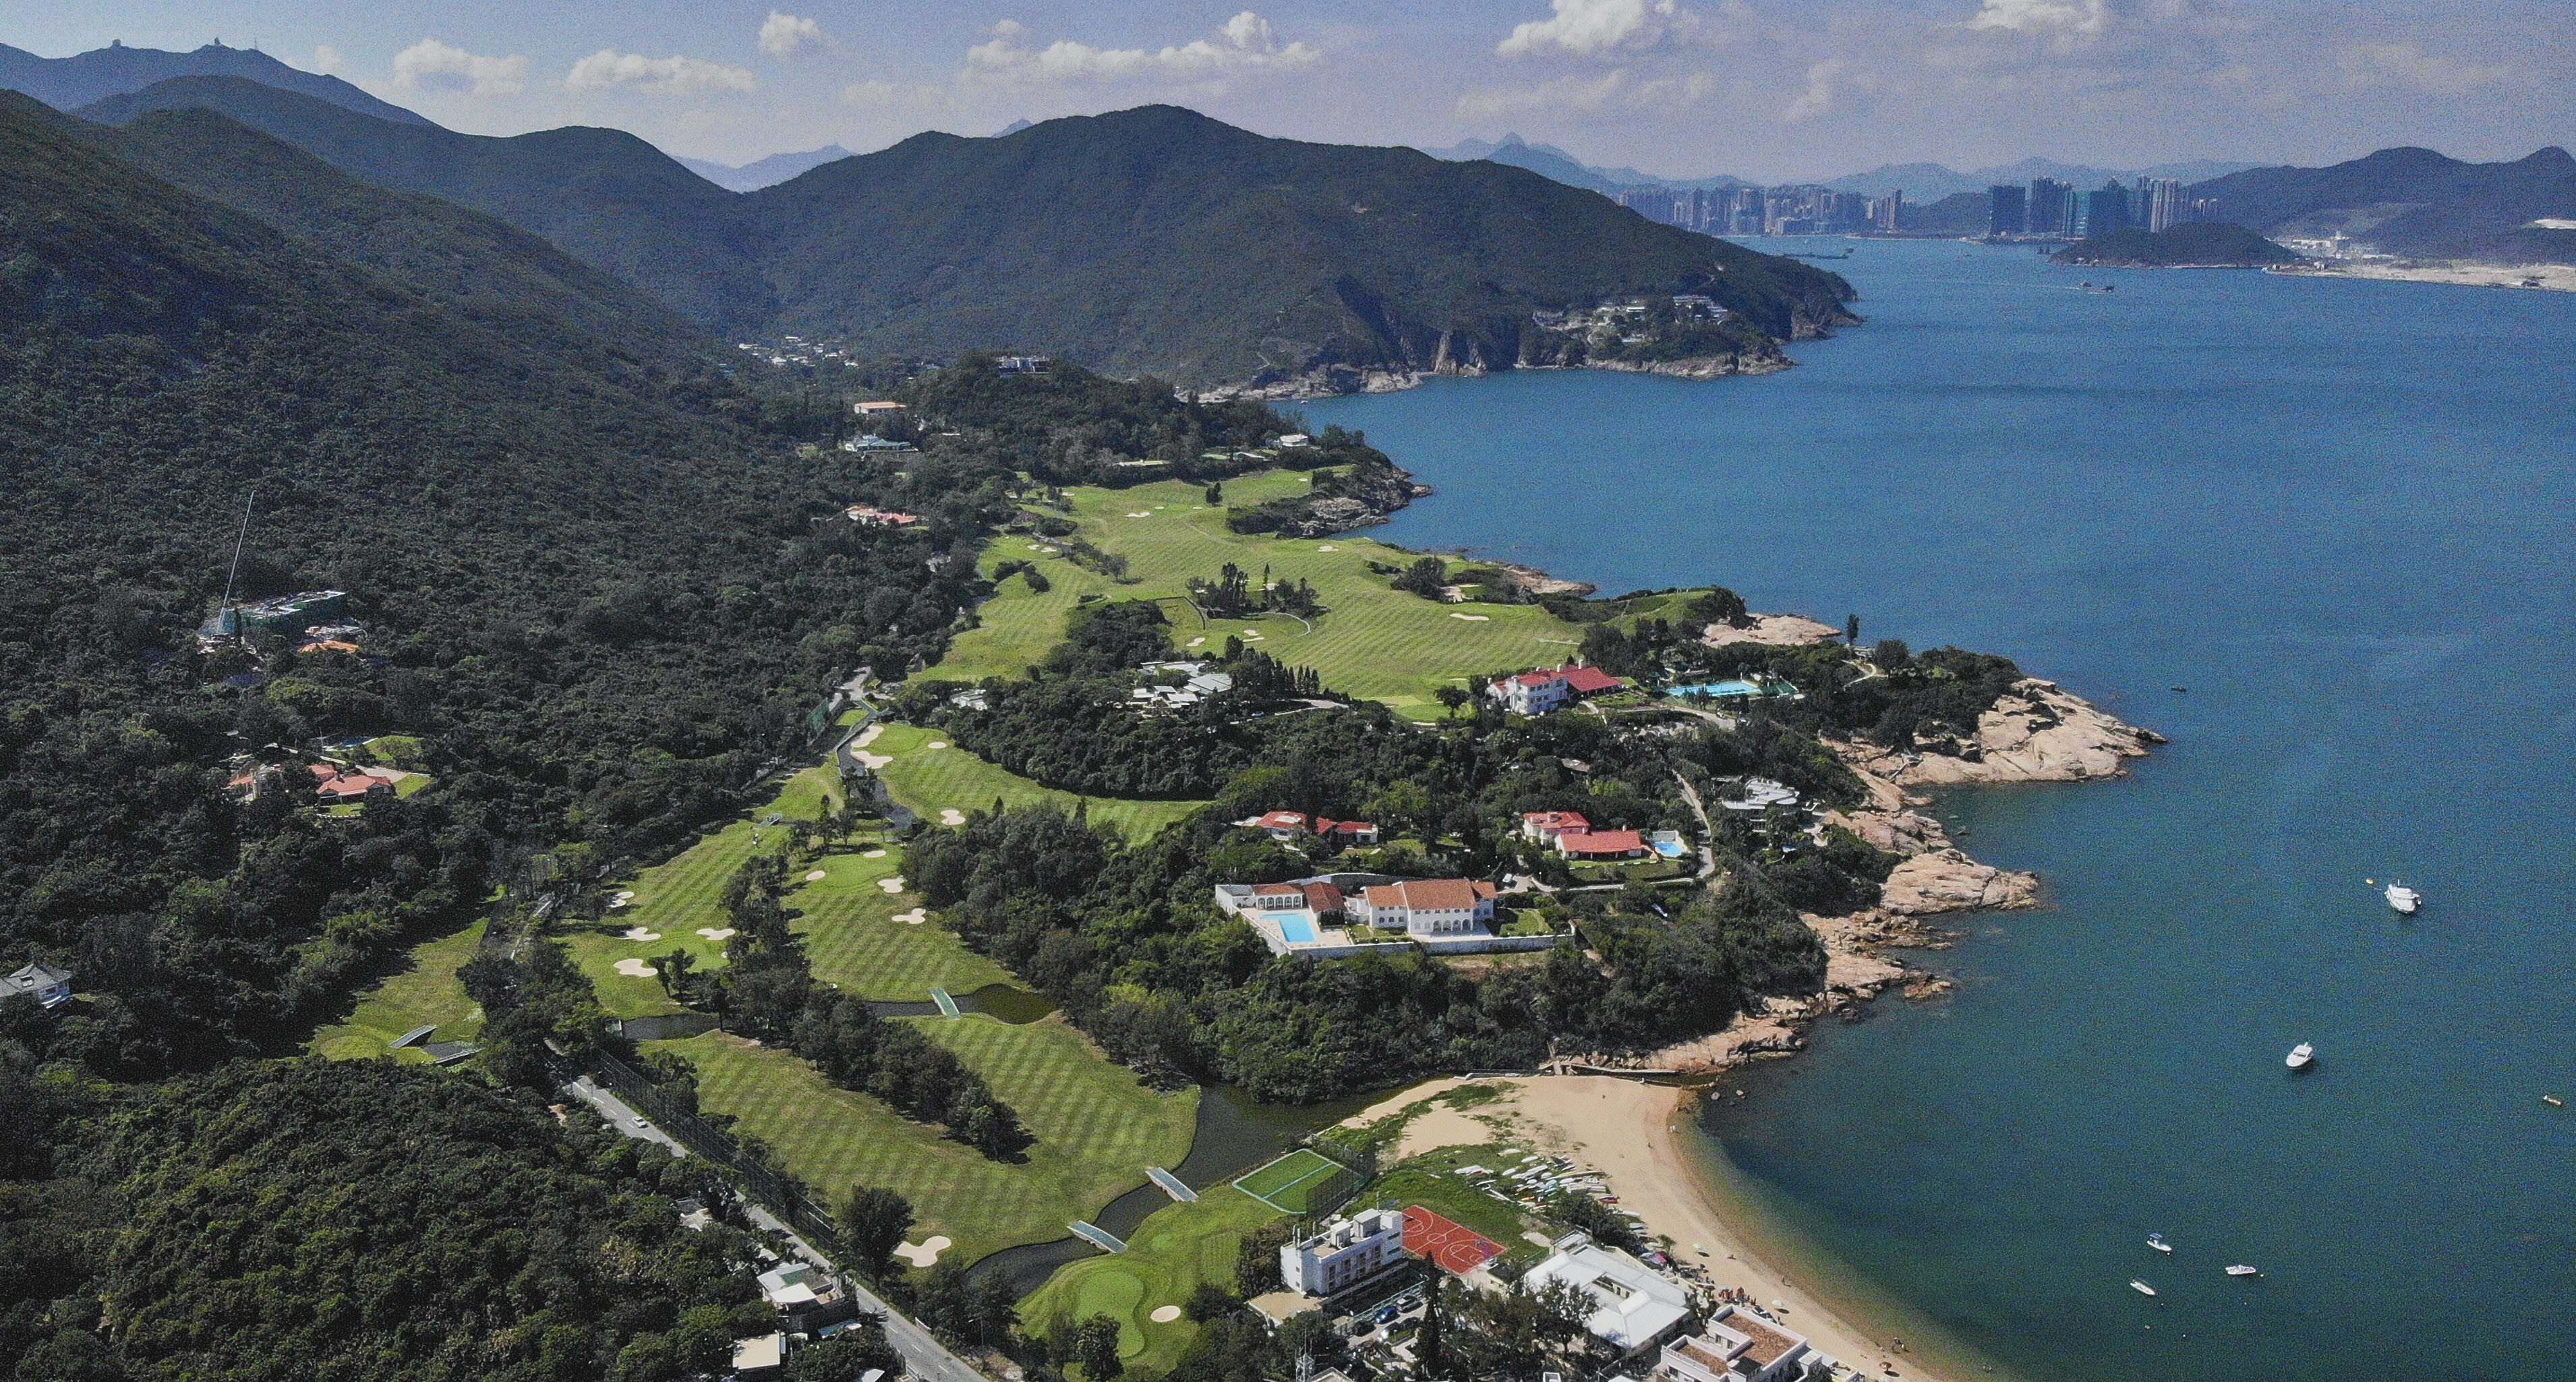 Aerial view of the Shek O Country Club and golf course, around which are dozens of billion-dollar homes owned by Hong Kong’s wealthiest people, on 19 May 2018. Photo: Roy Issa